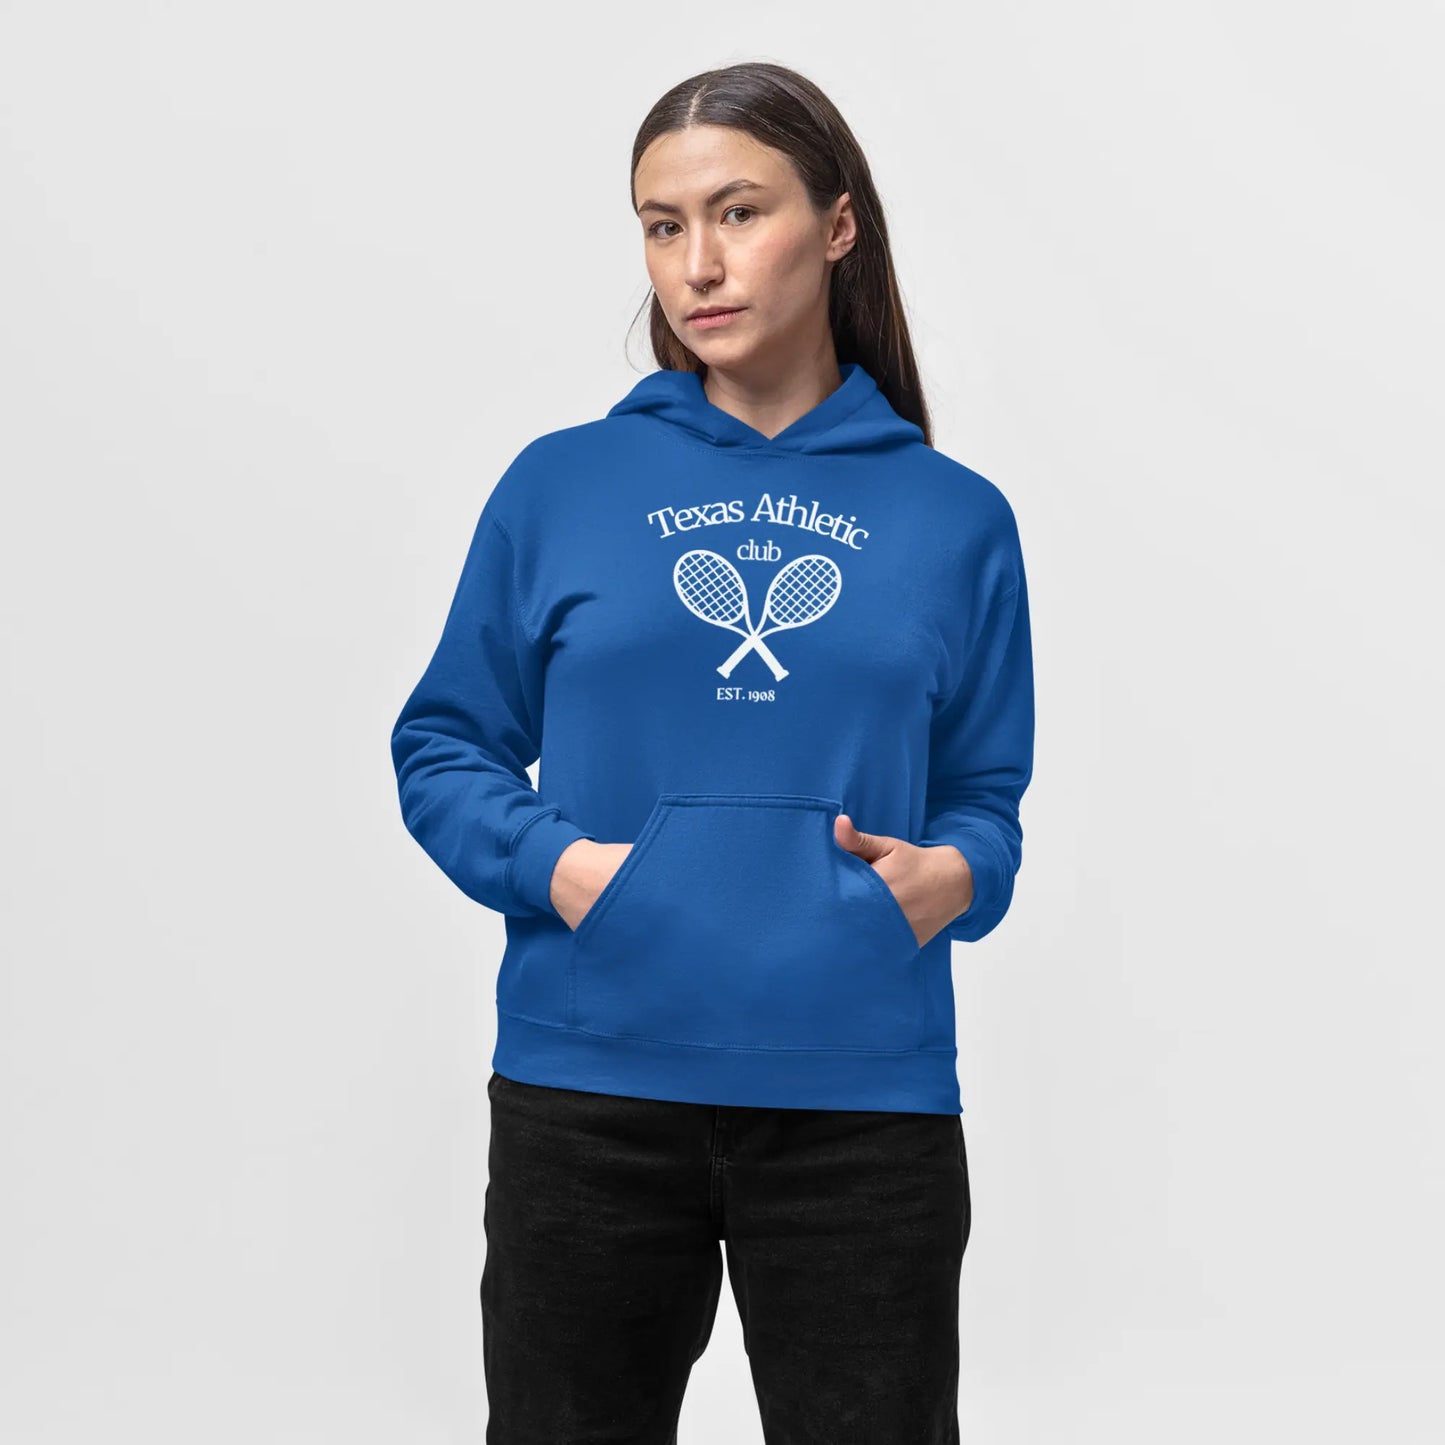 Woman in a royal blue hoodie with 'Texas Athletic Club EST. 1985' and crossed tennis rackets graphic on the front.